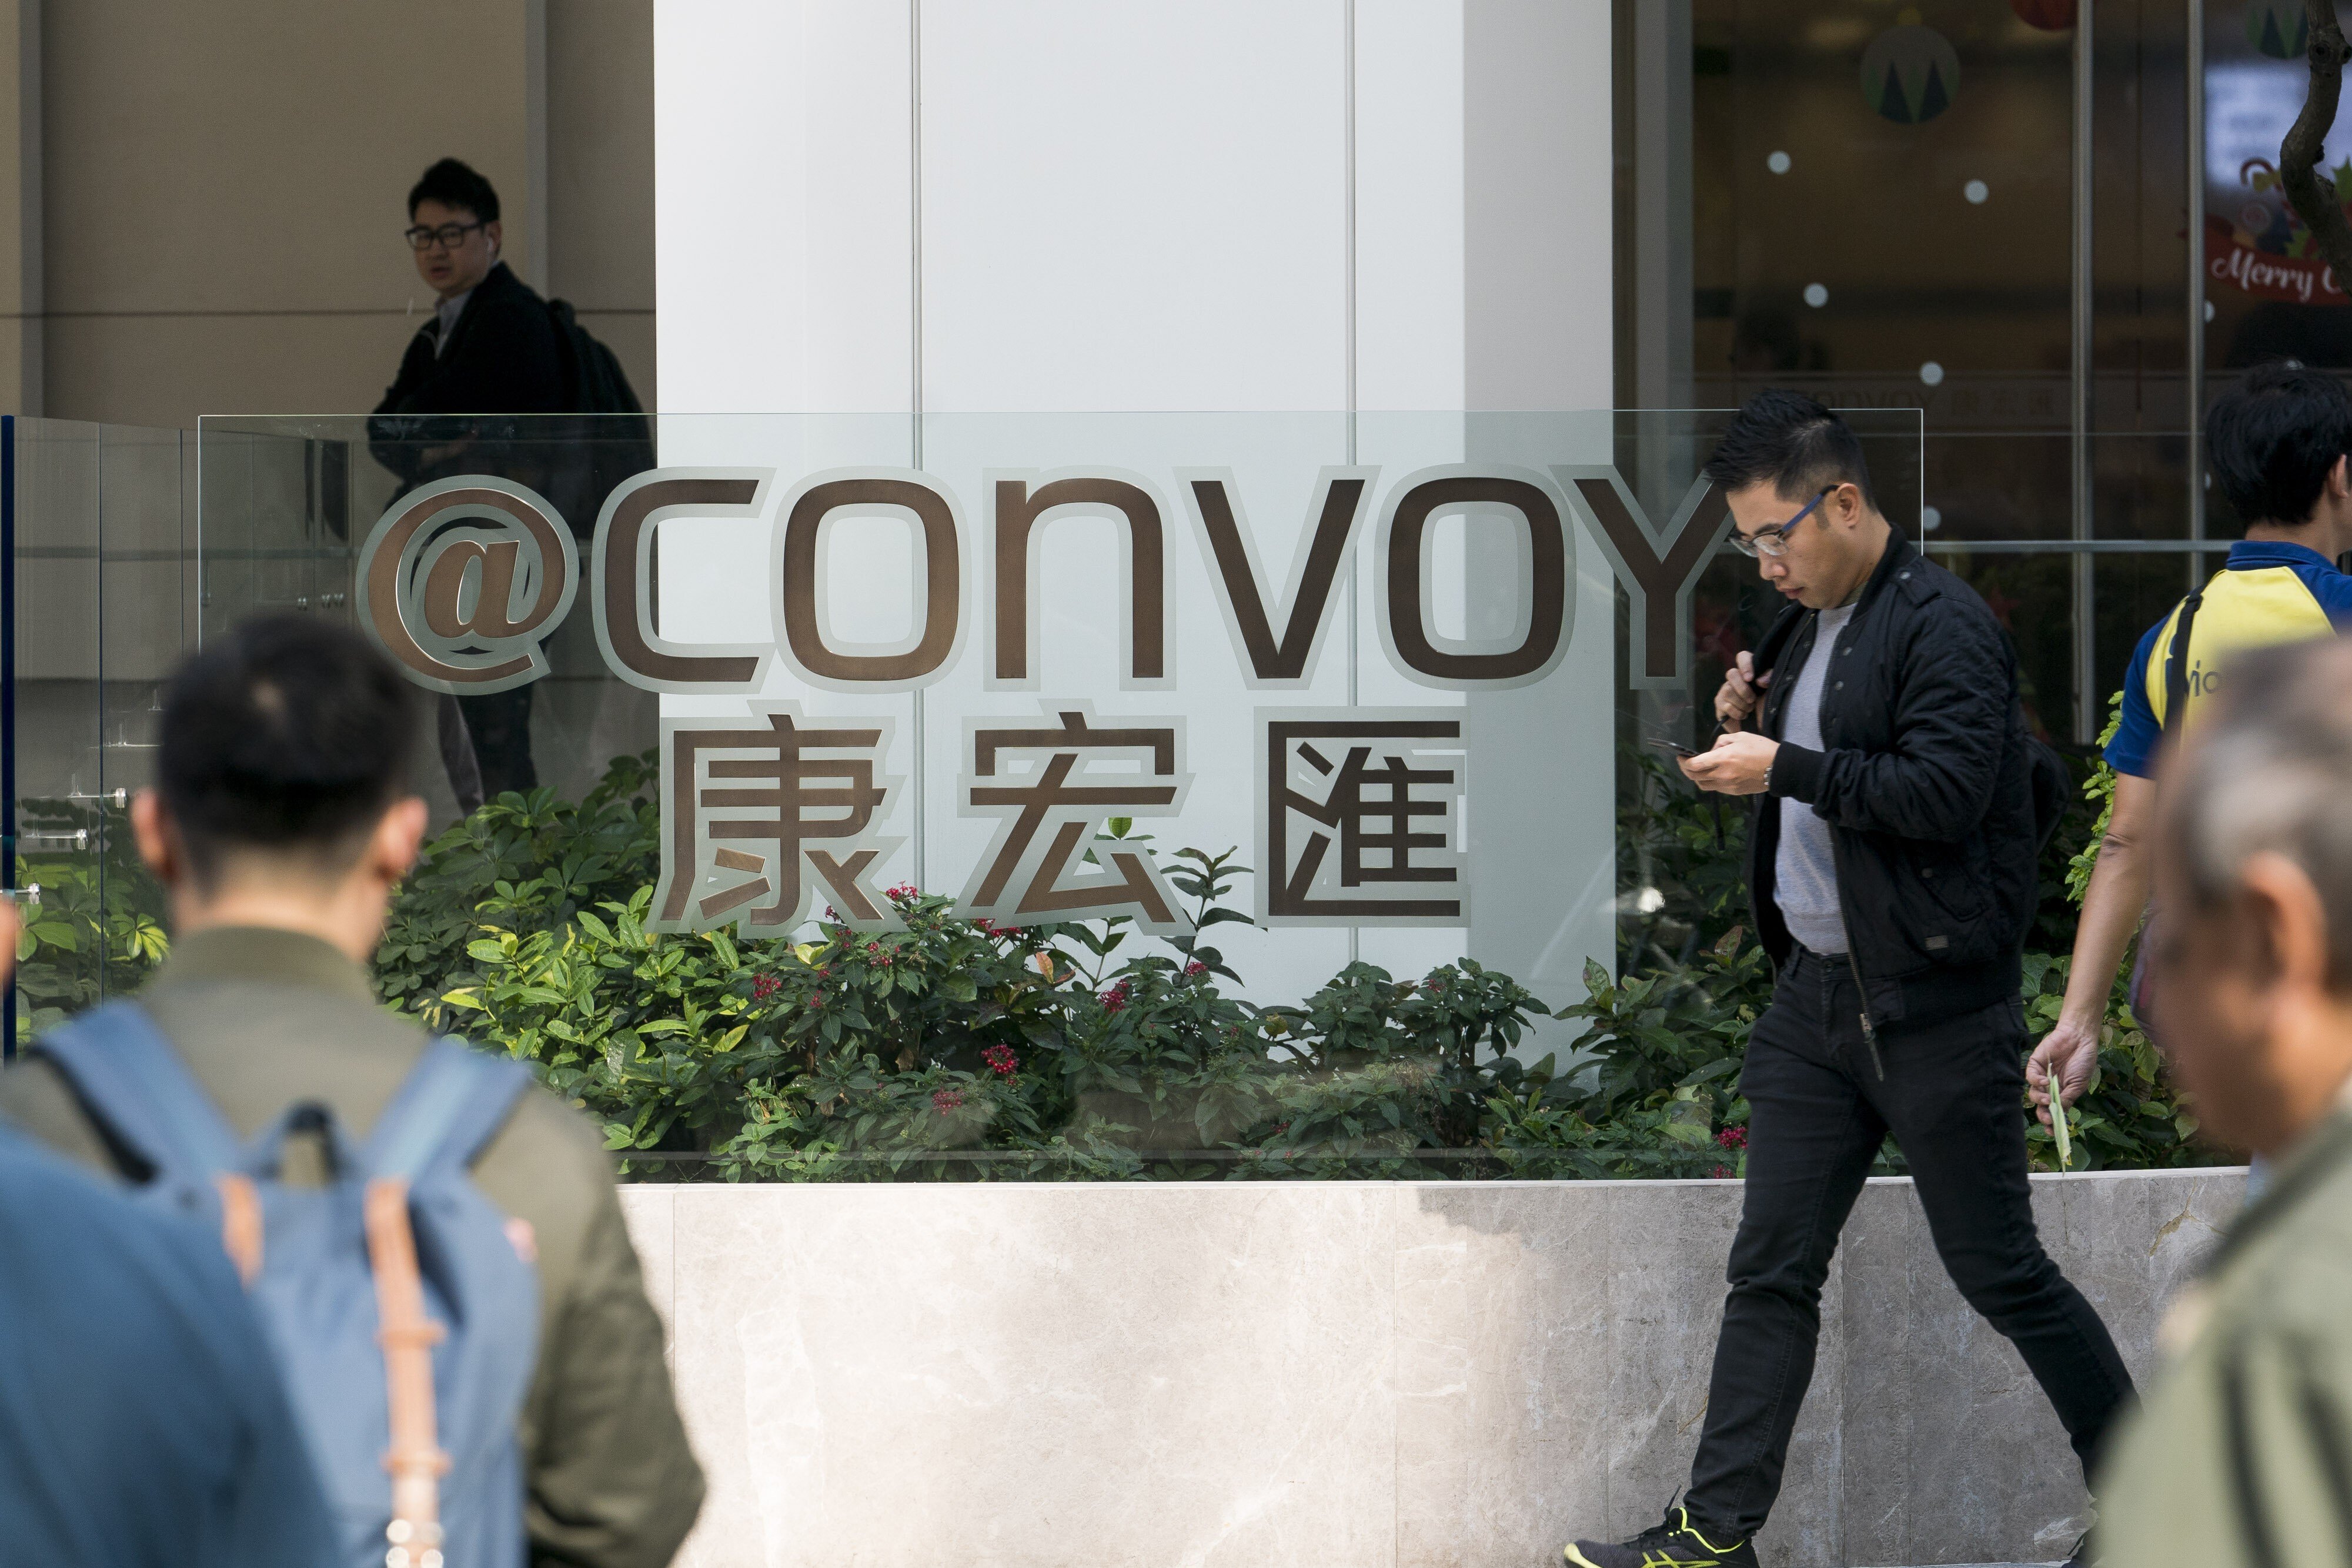 Pedestrians walk past the "@Convoy" building, which houses the headquarters of Convoy Global Holdings Ltd., in Hong Kong on Monday, December 11, 2017. Photo: Bloomberg